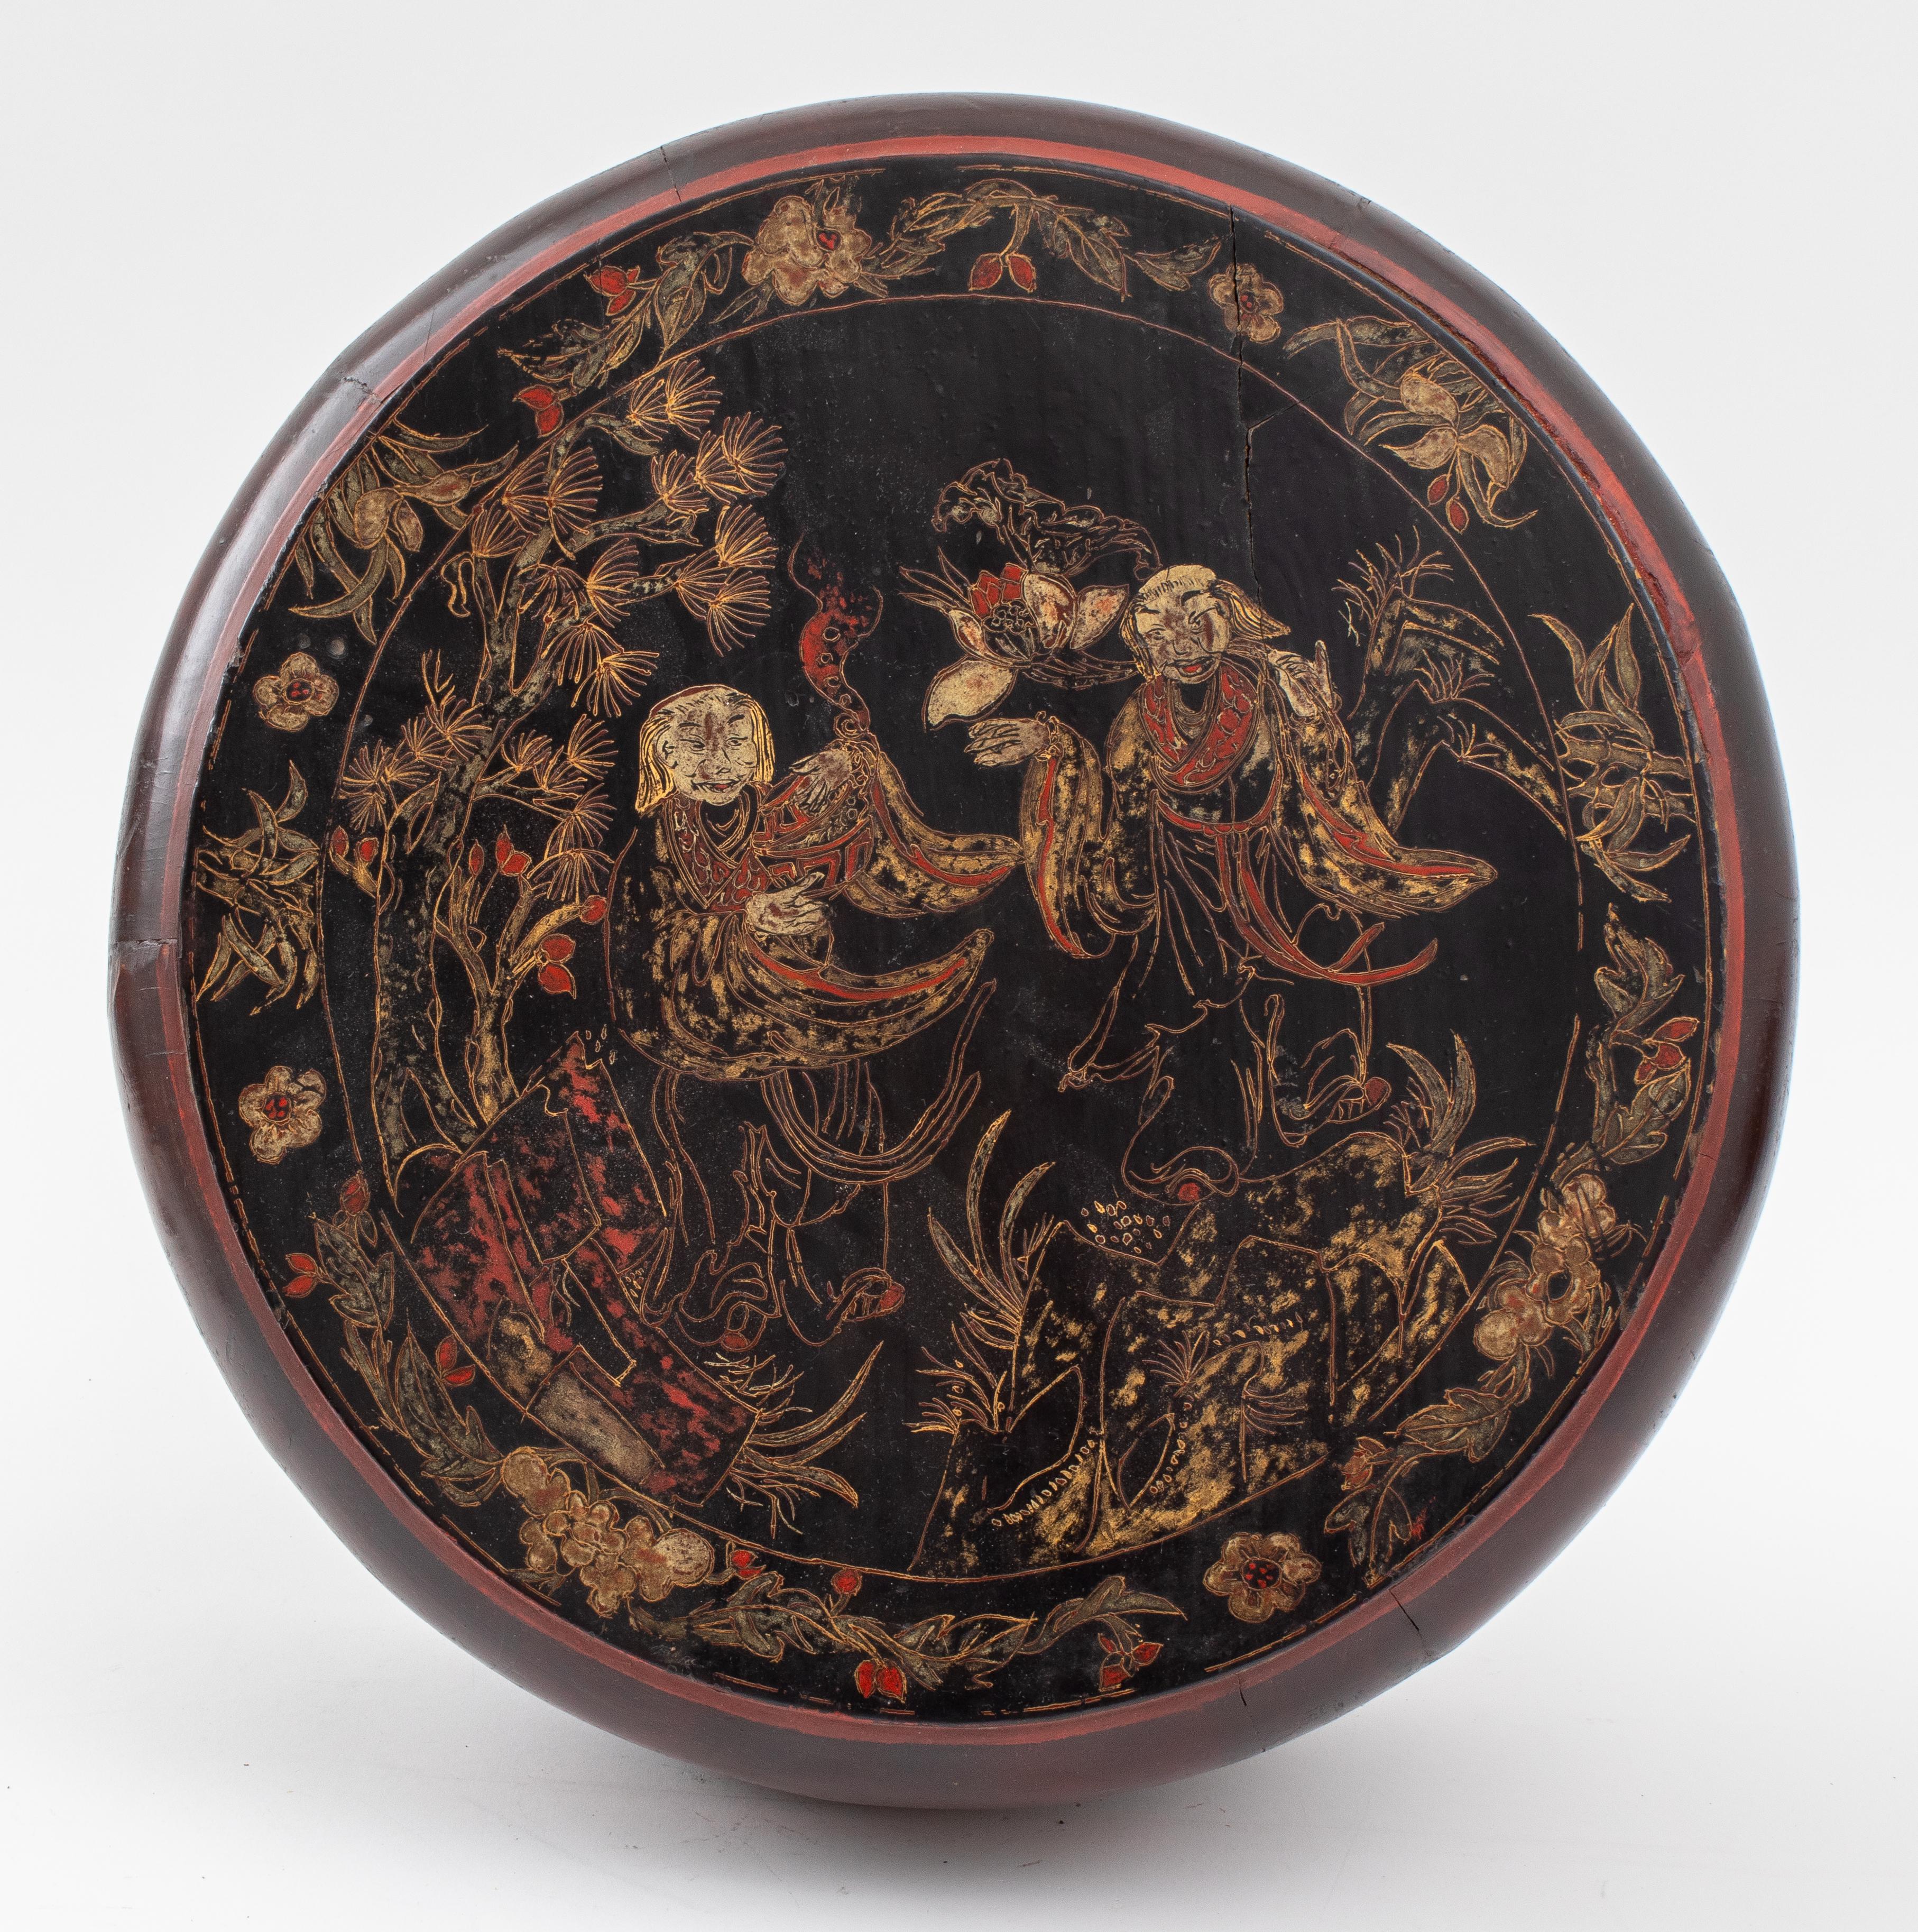 A Japanese lacquered drum-shaped box, with red details over black ground, the top decorated with images of actors wearing masks in a landscape. 
Measures: 7.5